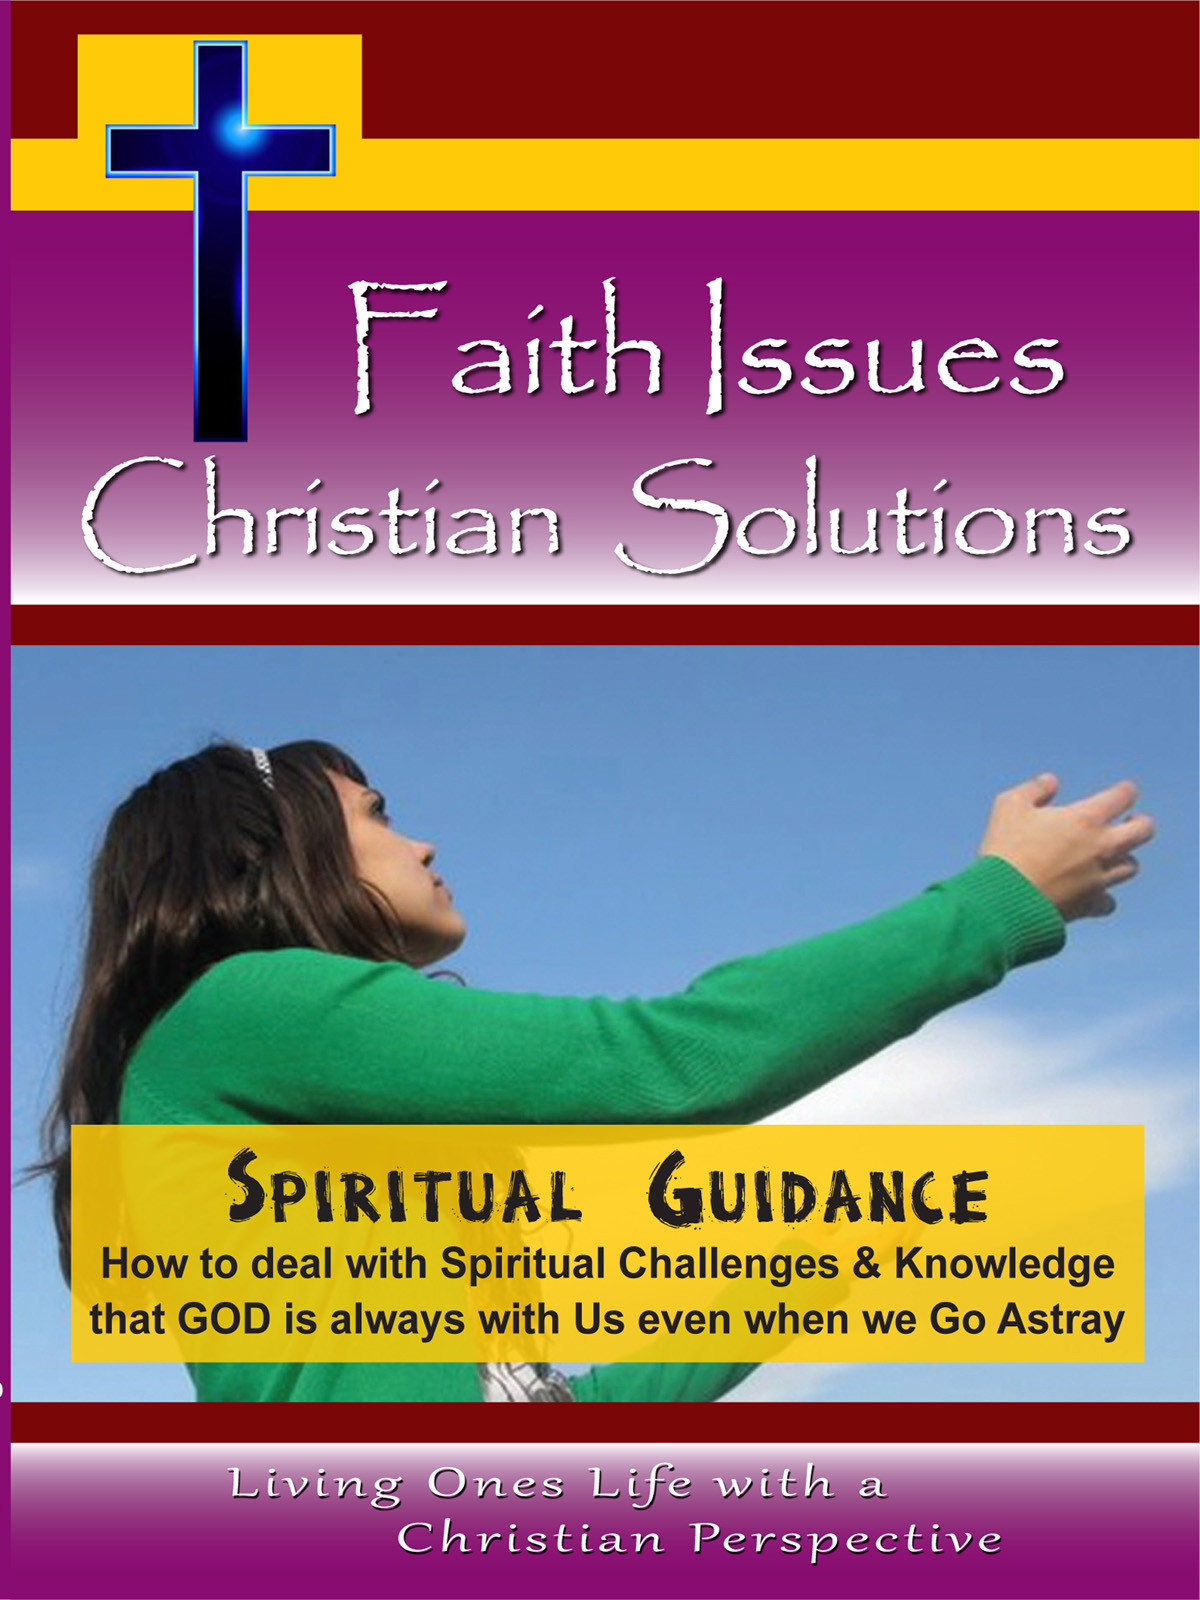 CH10049 - Spiritual Guidance How to deal with Spiritual Challenges & Knowledge that GOD is always with Us even when we Go Astray